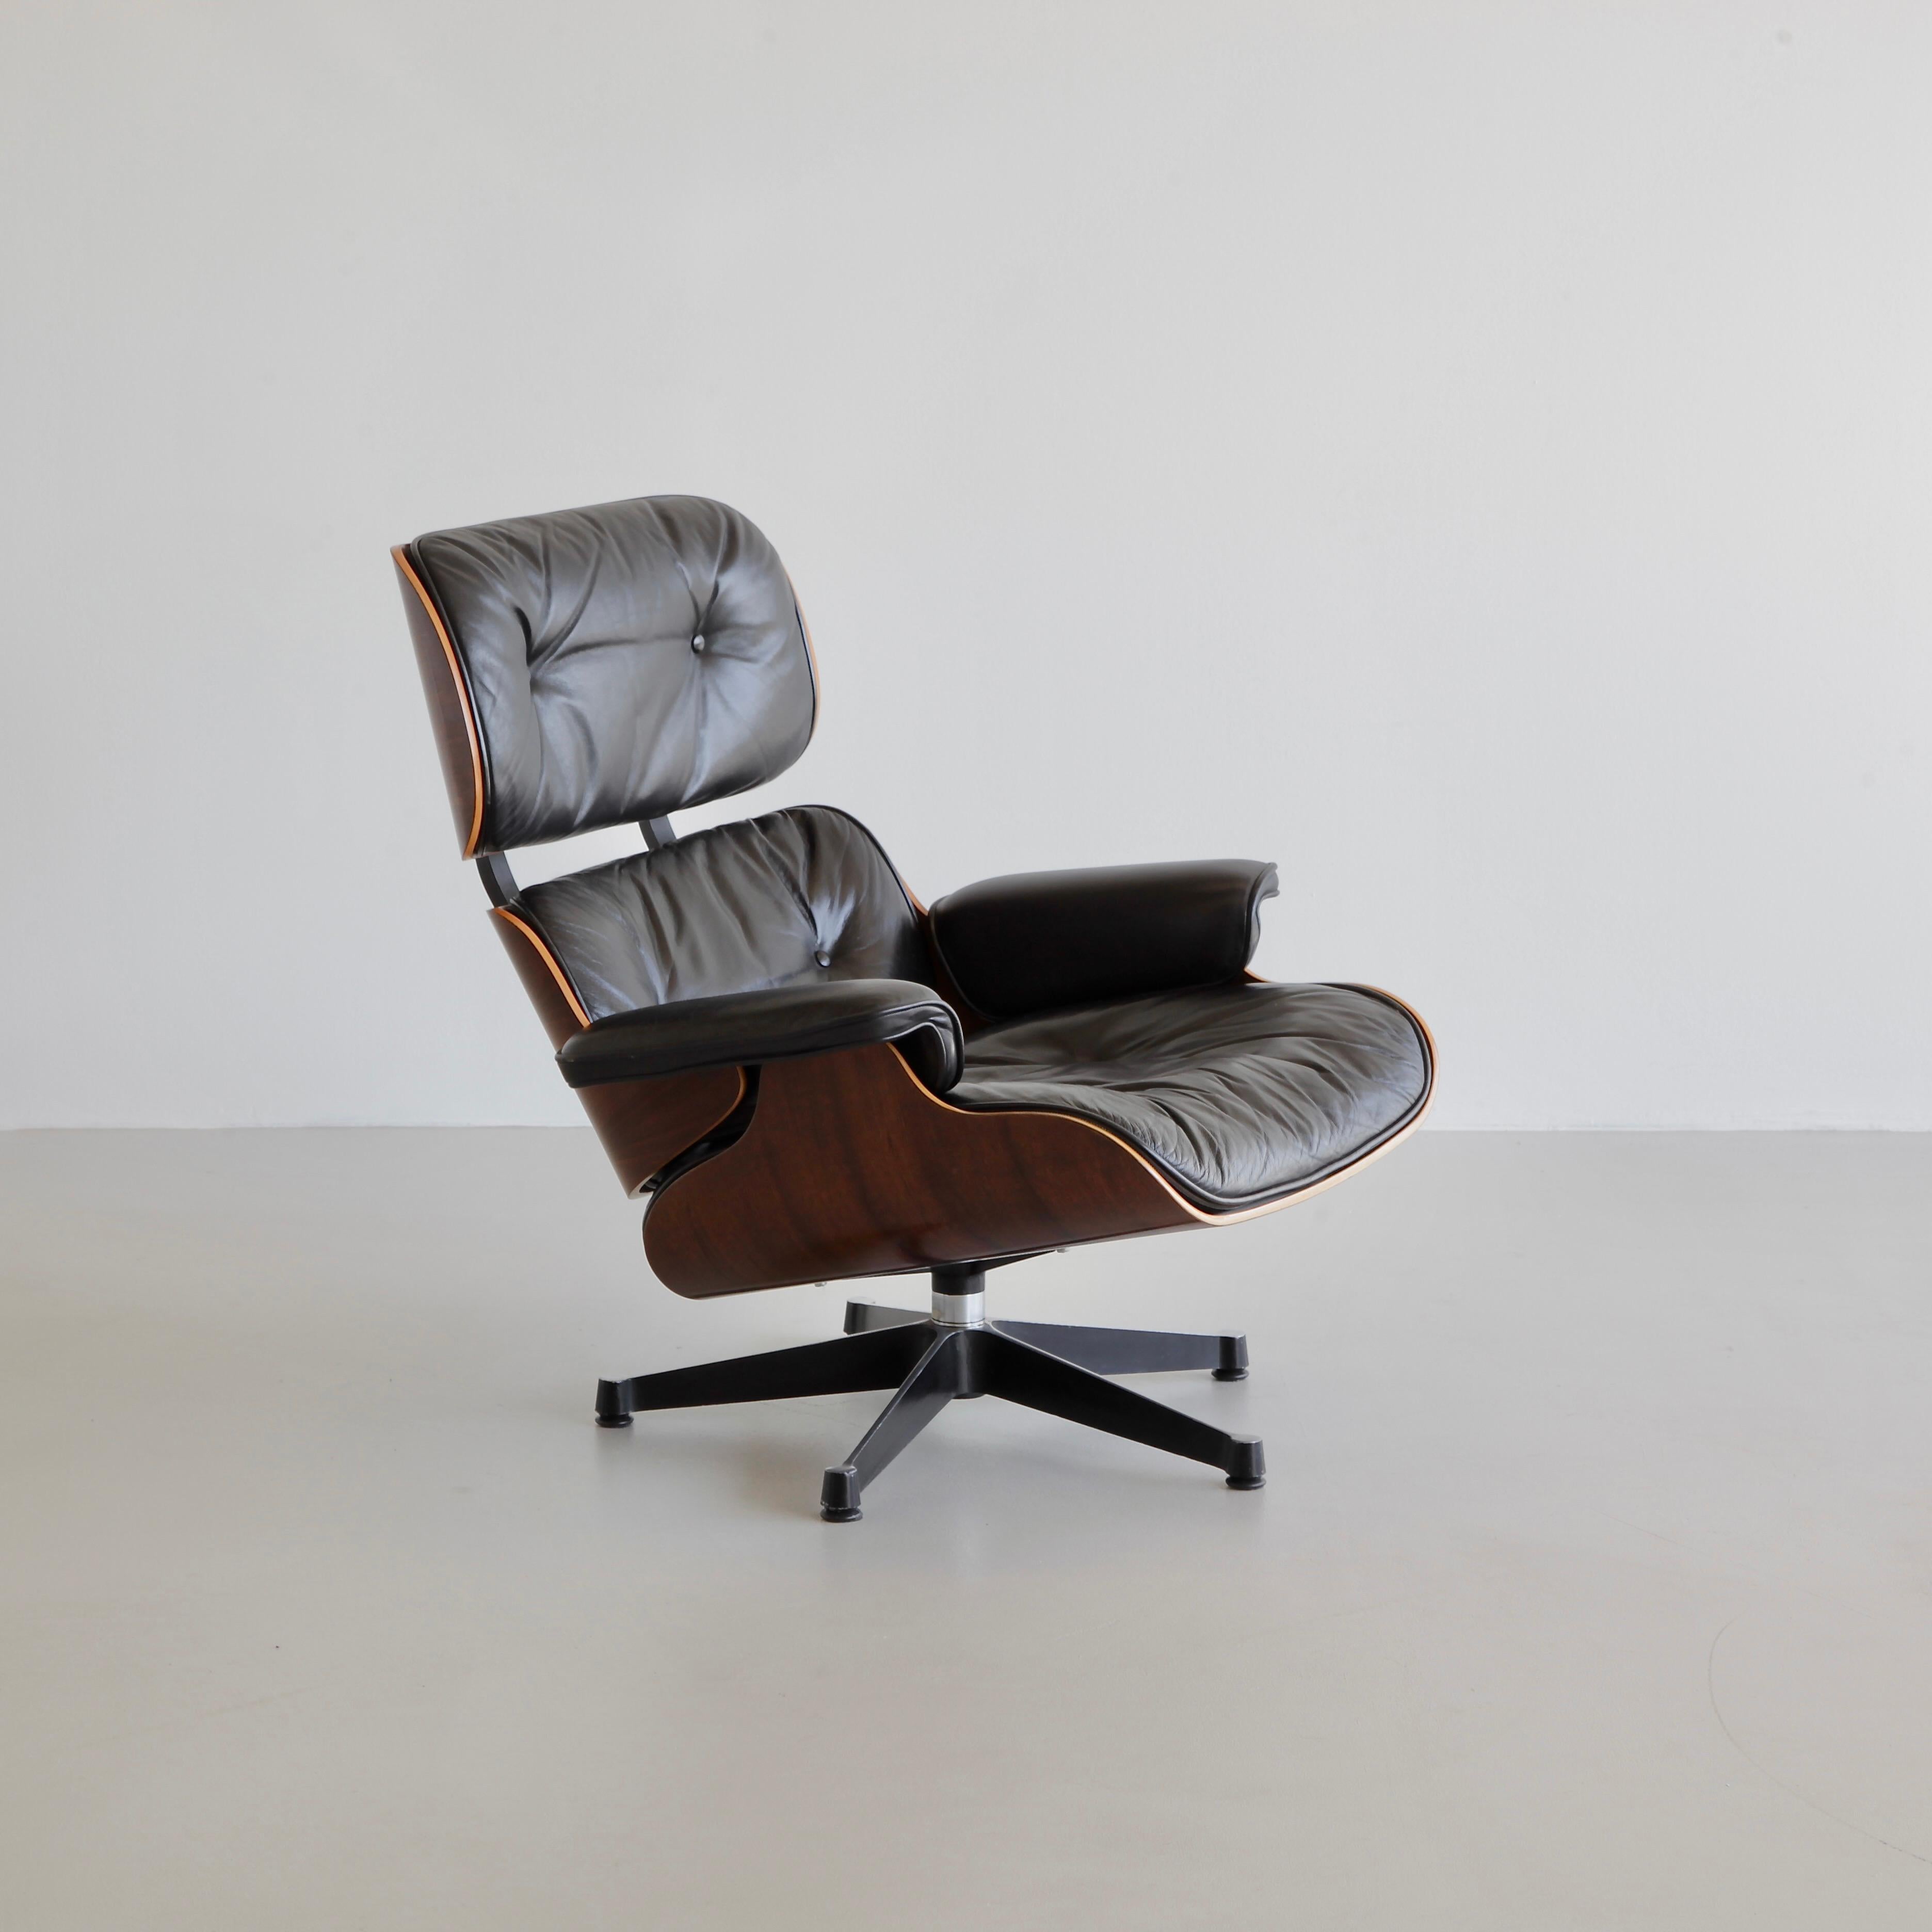 Lounge Chair and ottoman, designed by Charles and Ray Eames in 1956. Germany, VITRA, 1970s.

Beautiful original lounge chair with rosewood shell and subtle black leather upholstery. The original maker's labels, both under the chair and footstool